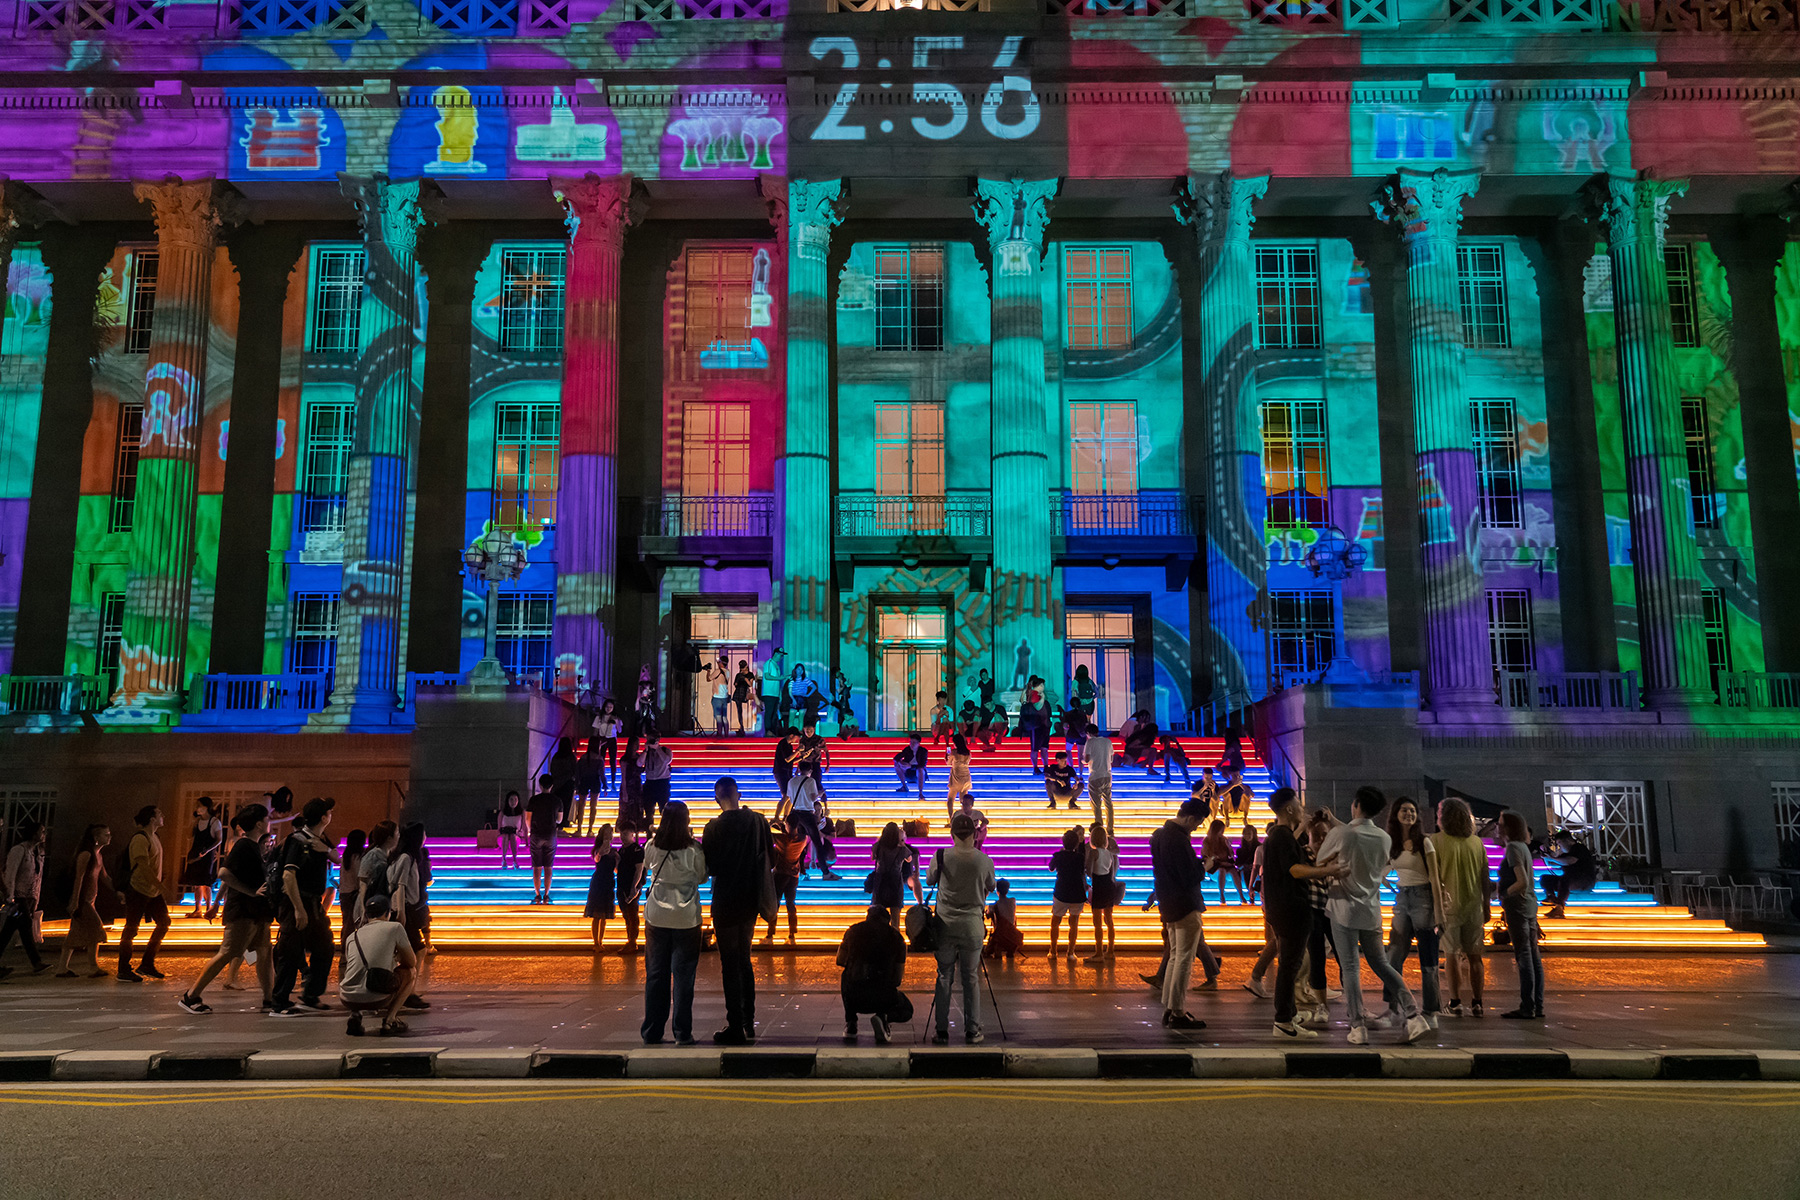 National Gallery in Singapore lit up with beautiful, colorful lights